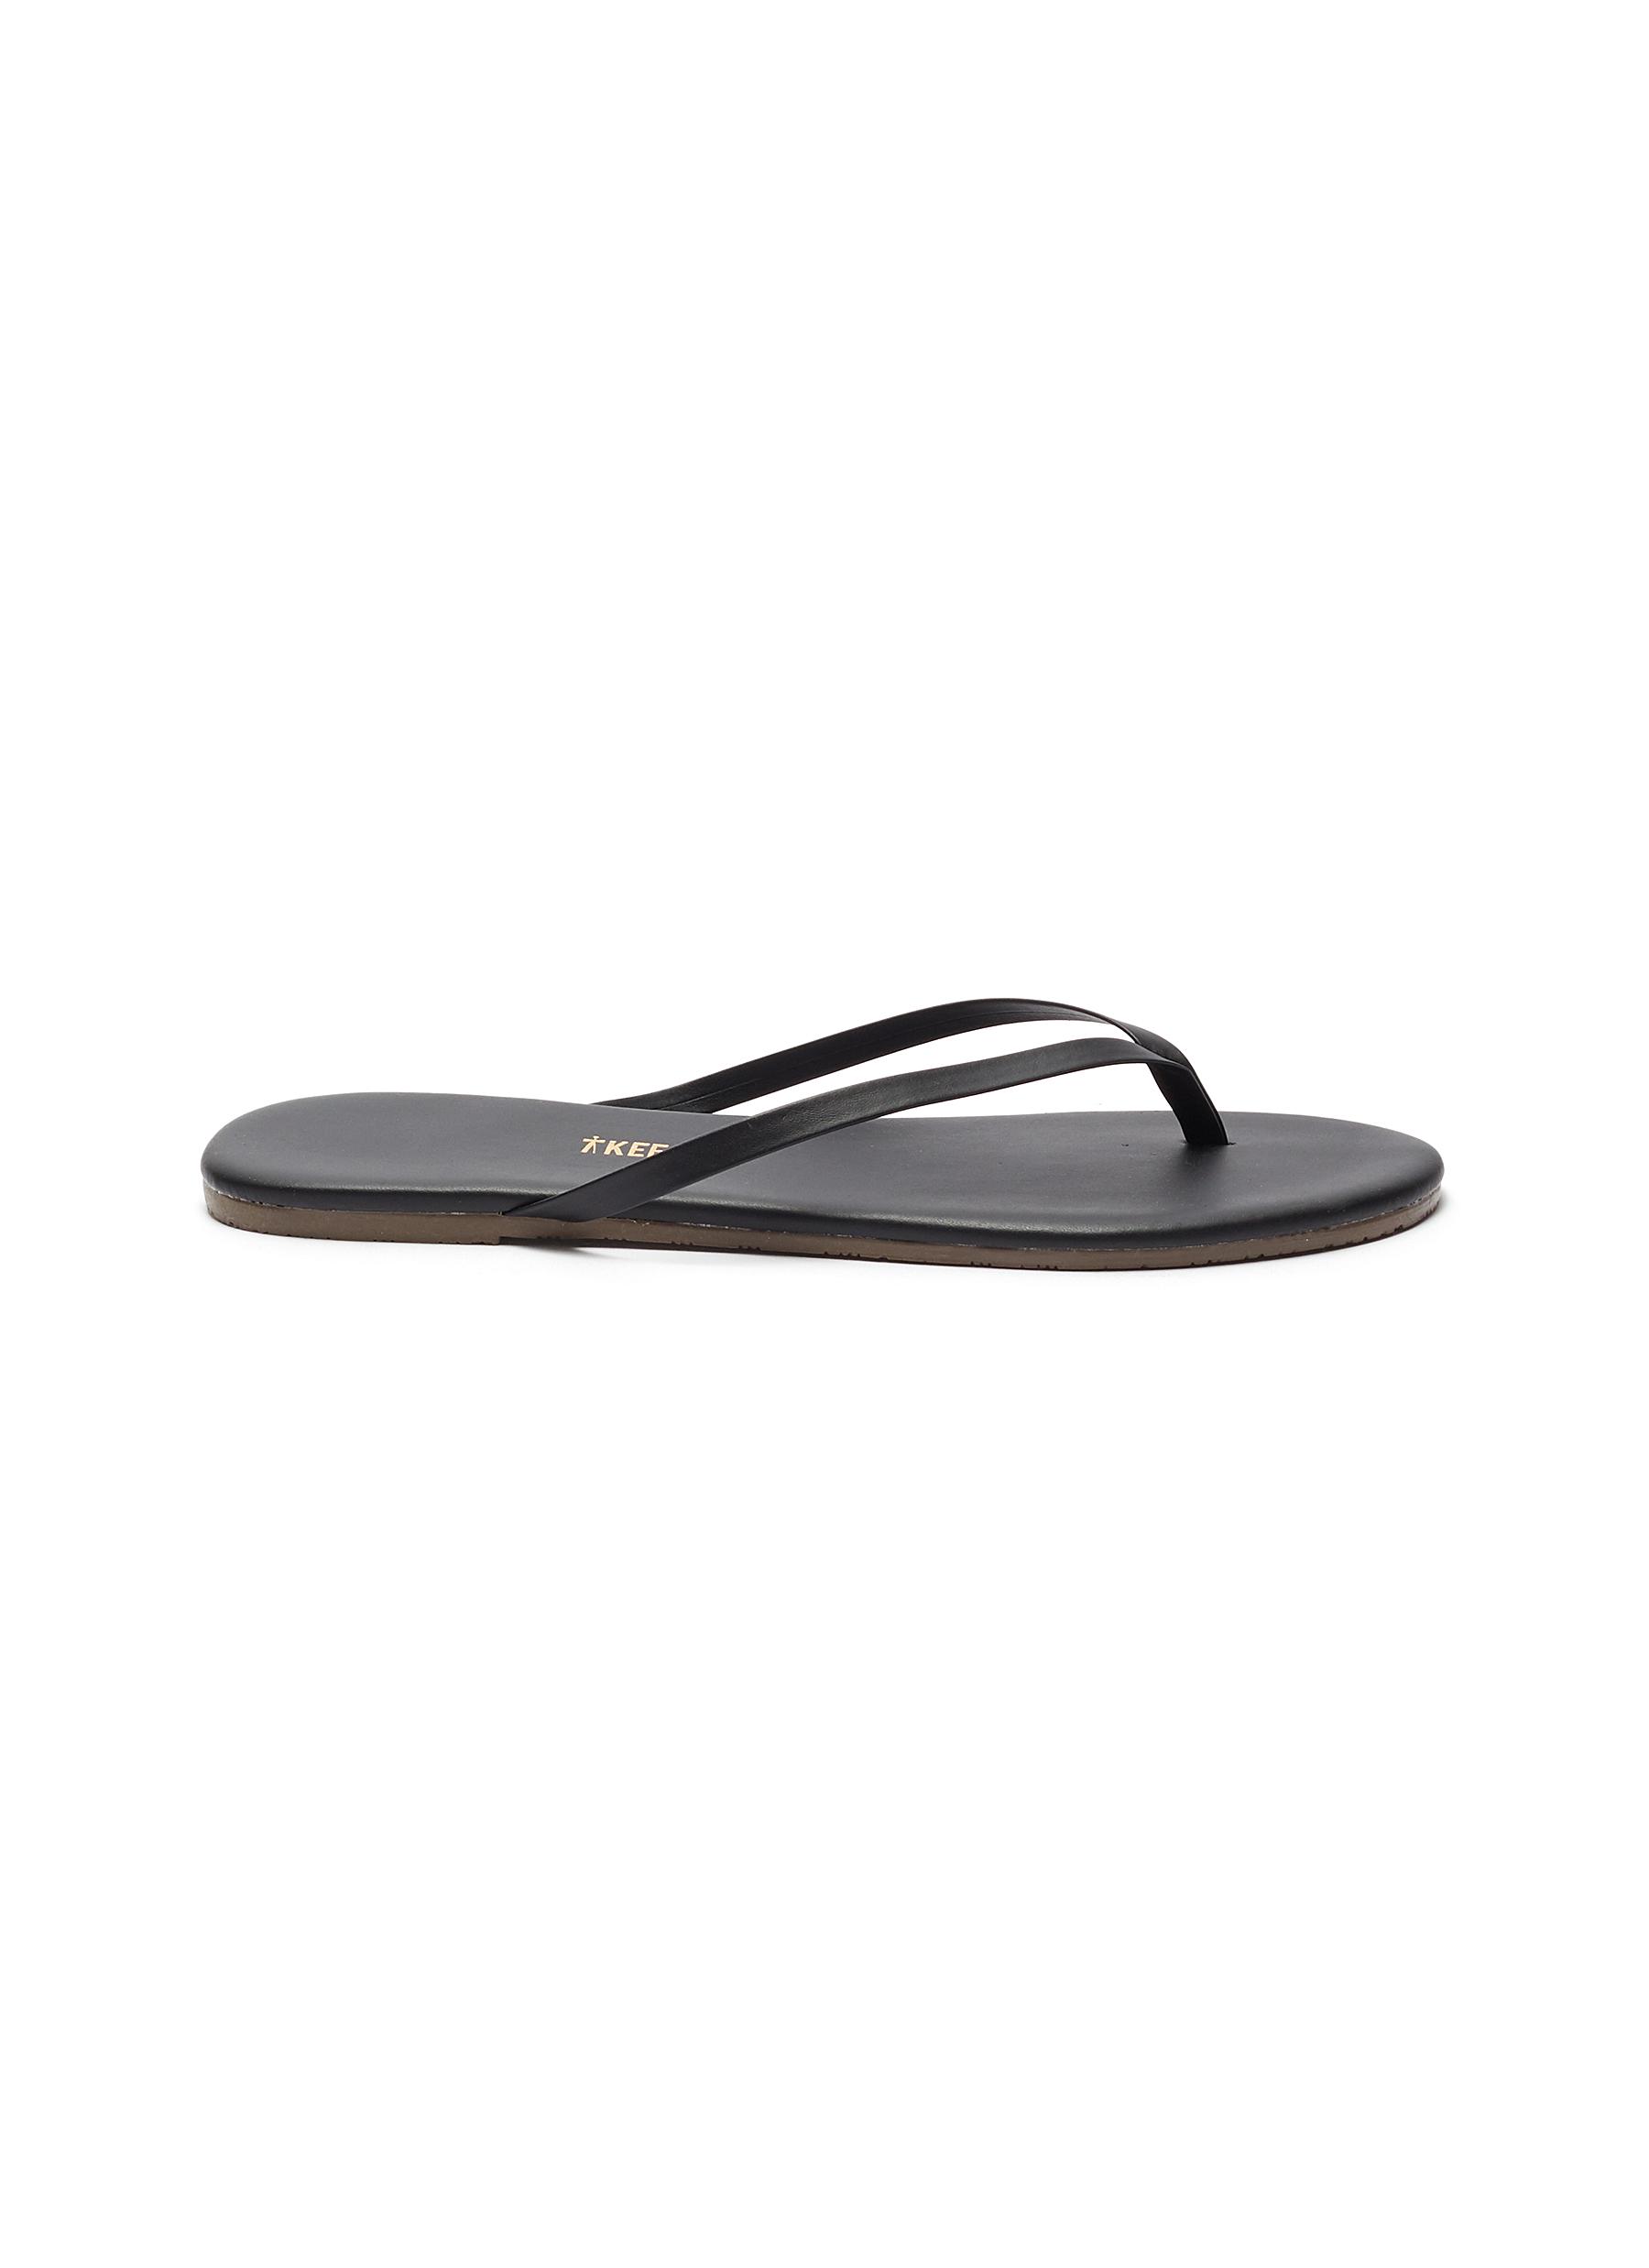 TKEES | Liners leather flip flops 